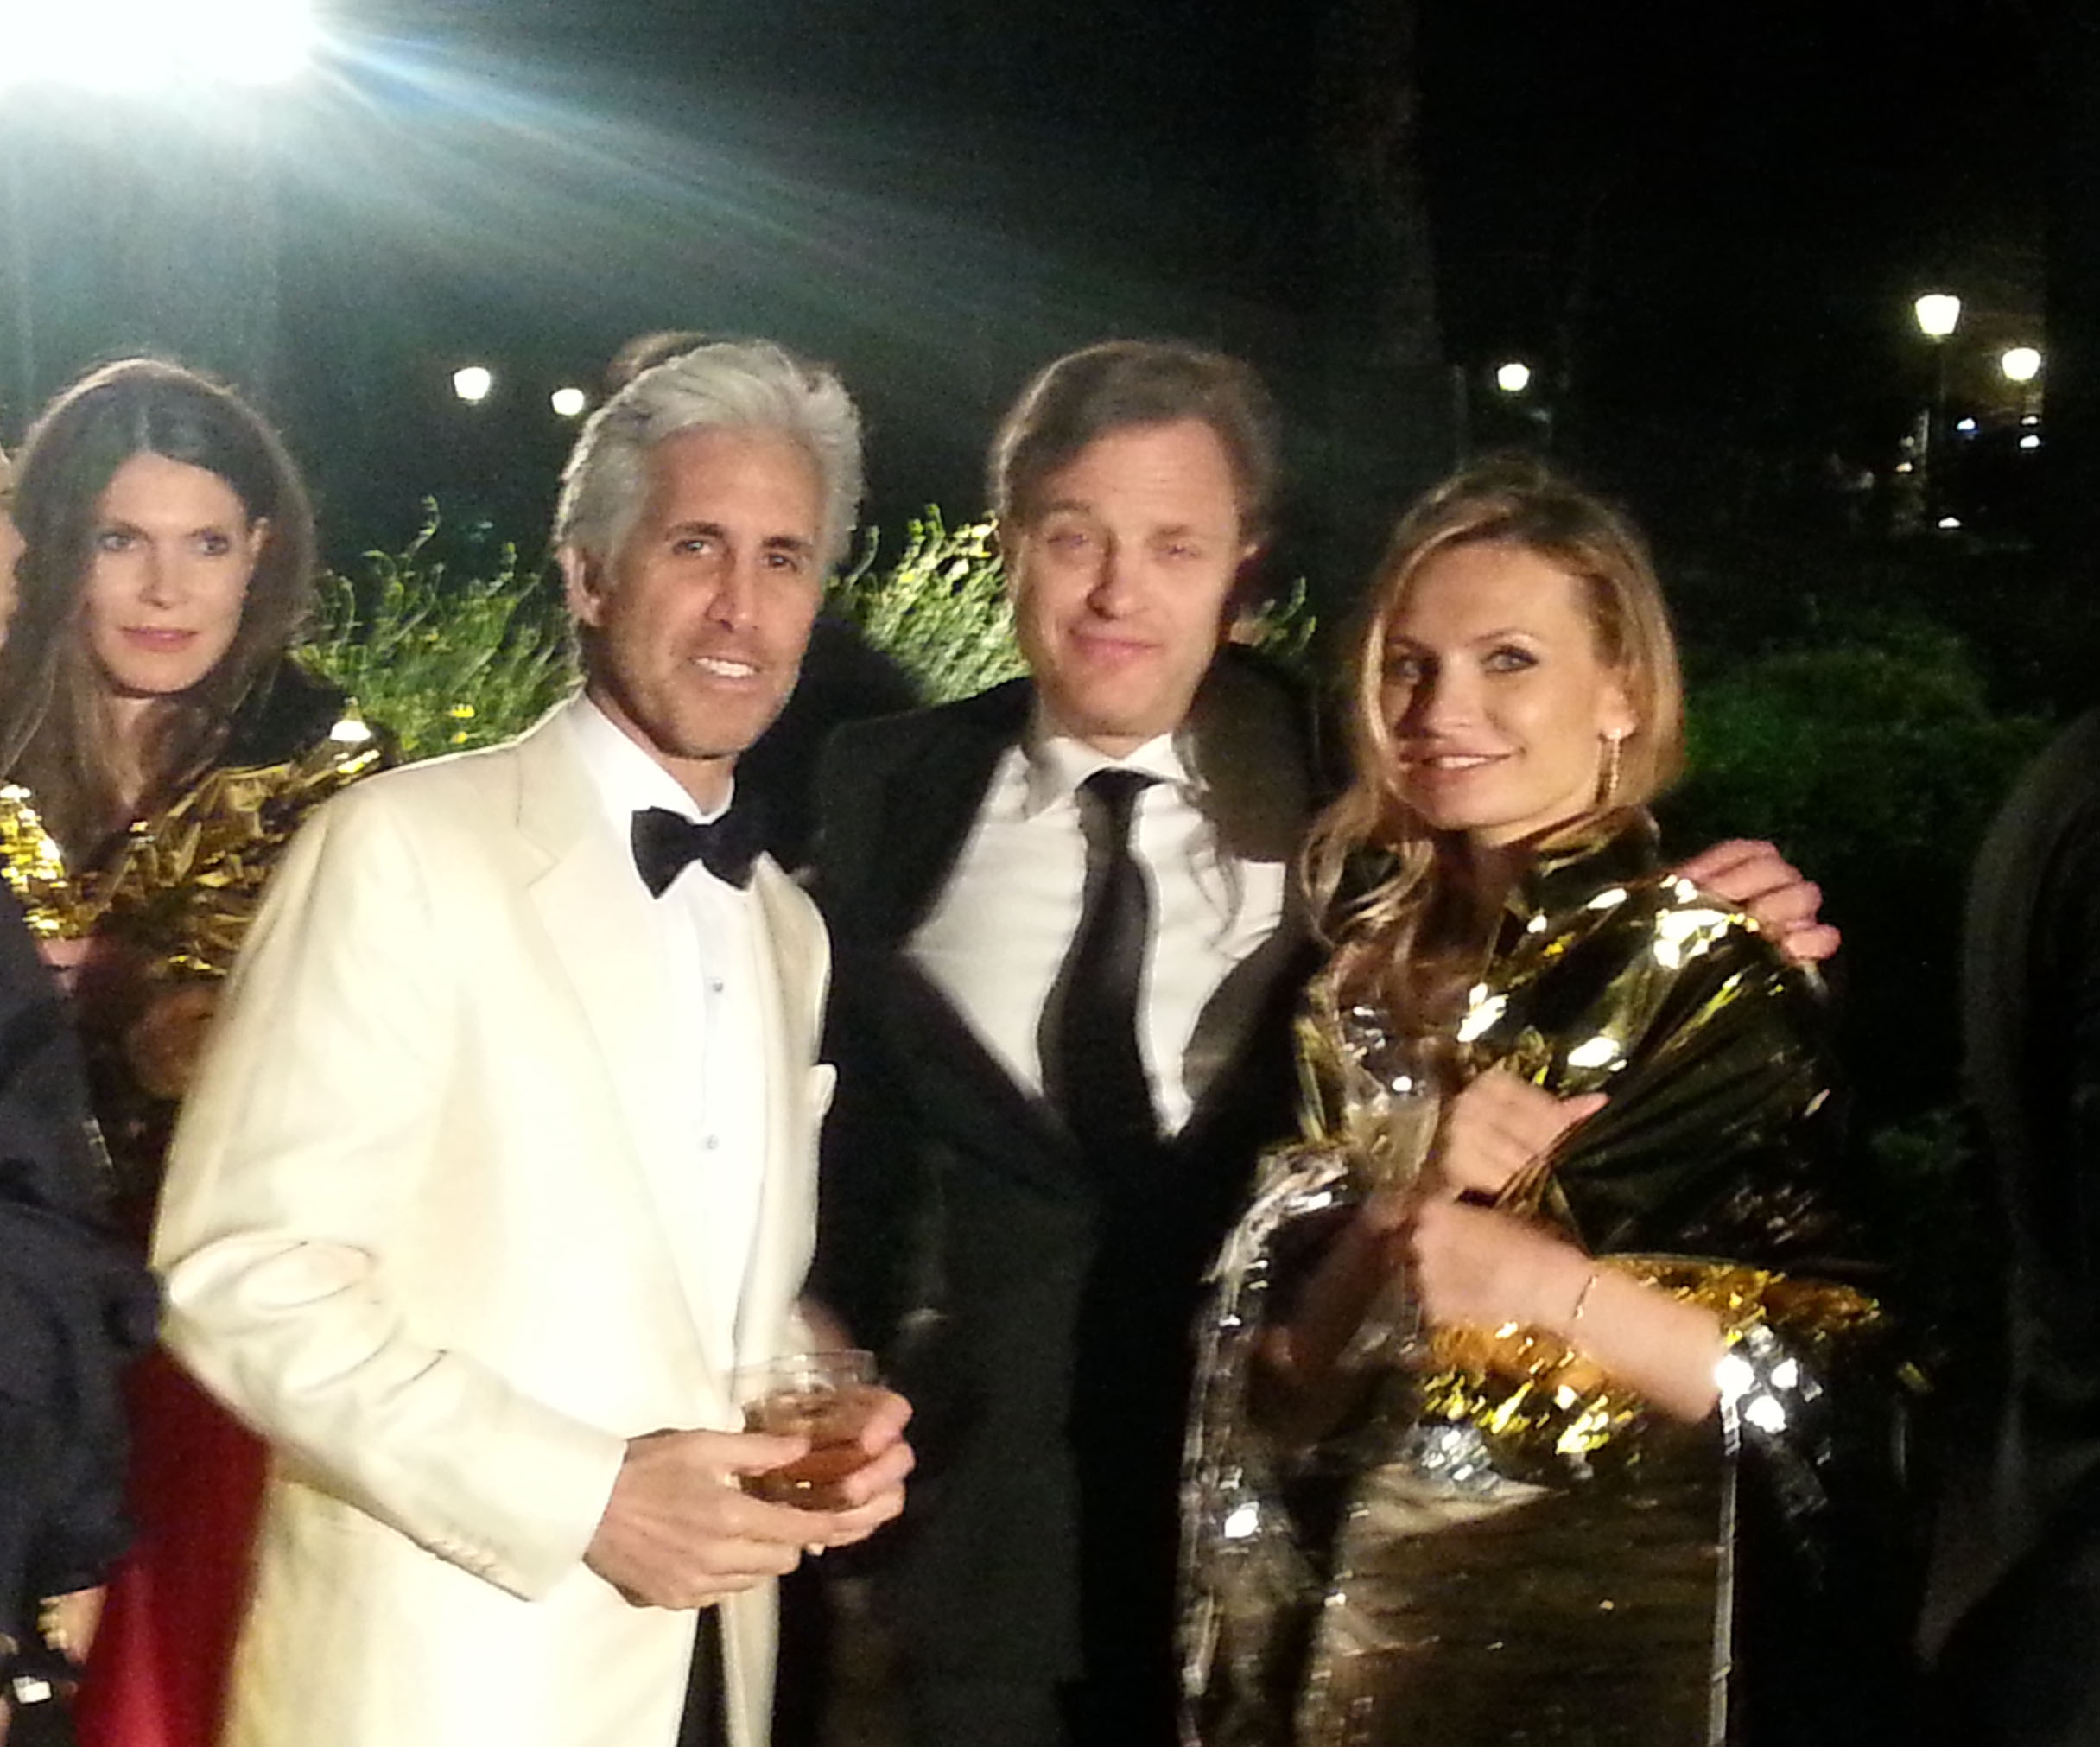 With Michael Mailer-Cannes, 2013